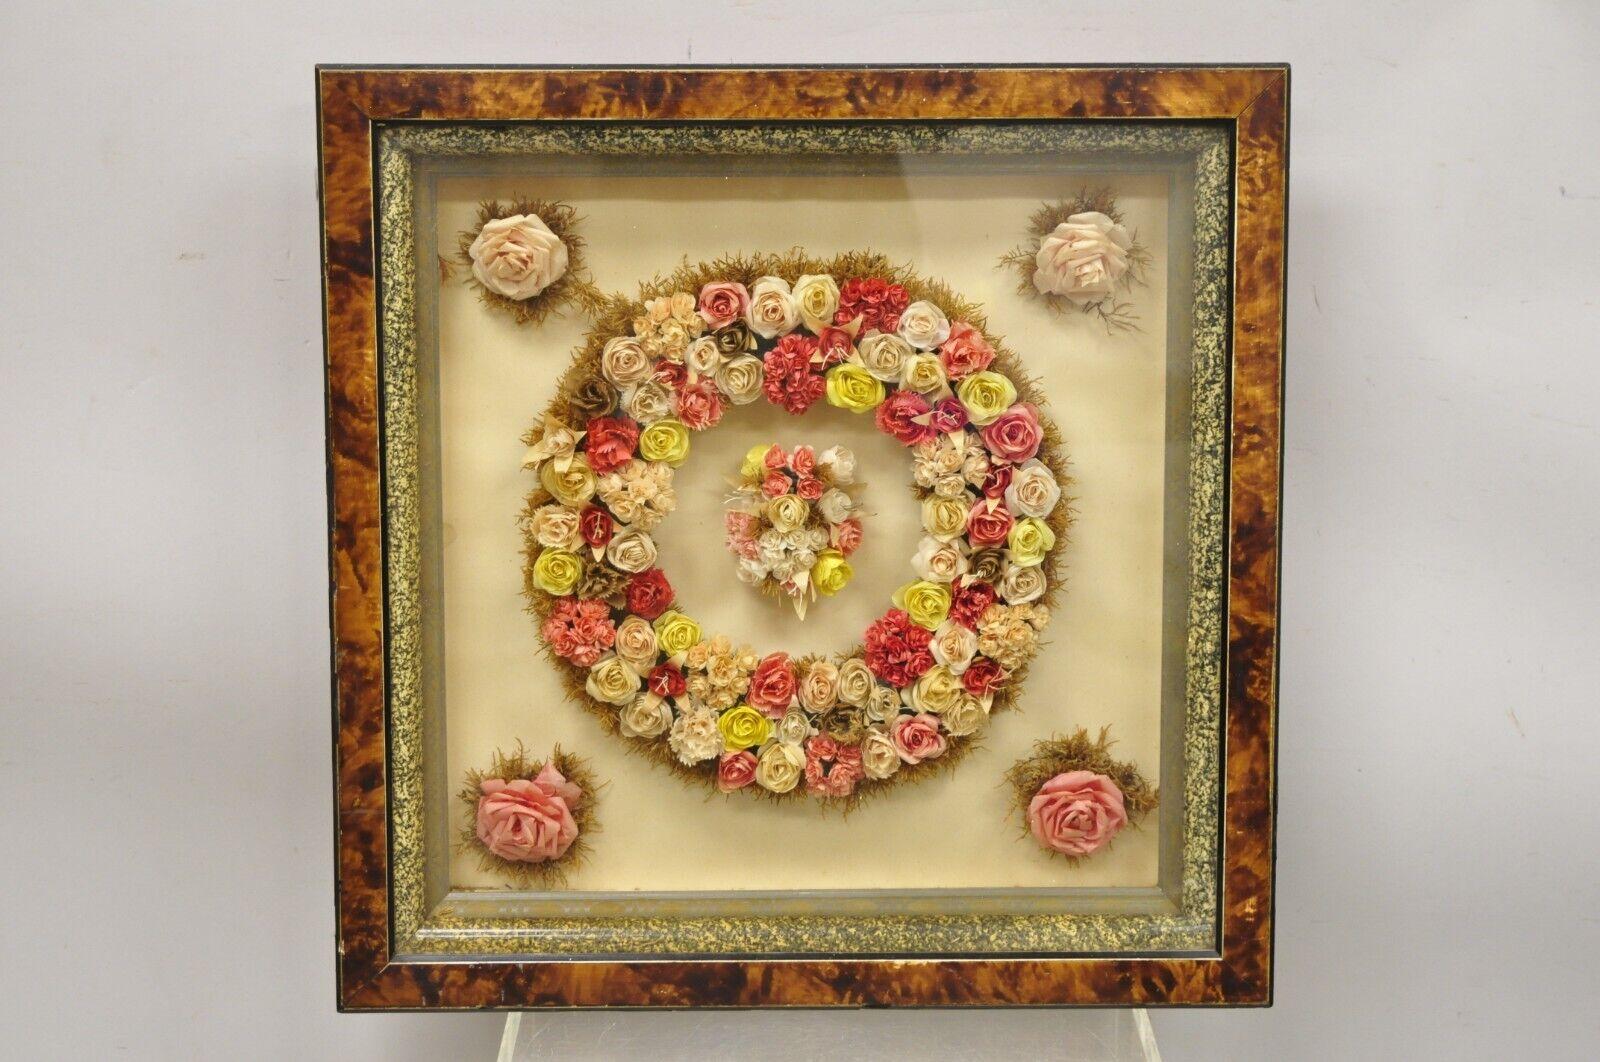 Antique Victorian paper mache flower mourning wreath shadow box frame Oddity. Item features an ornate paper mache colorful flower arrangement, burlwood frame, glass front, very nice antique item. Circa 19th century. Measurements: 23.5